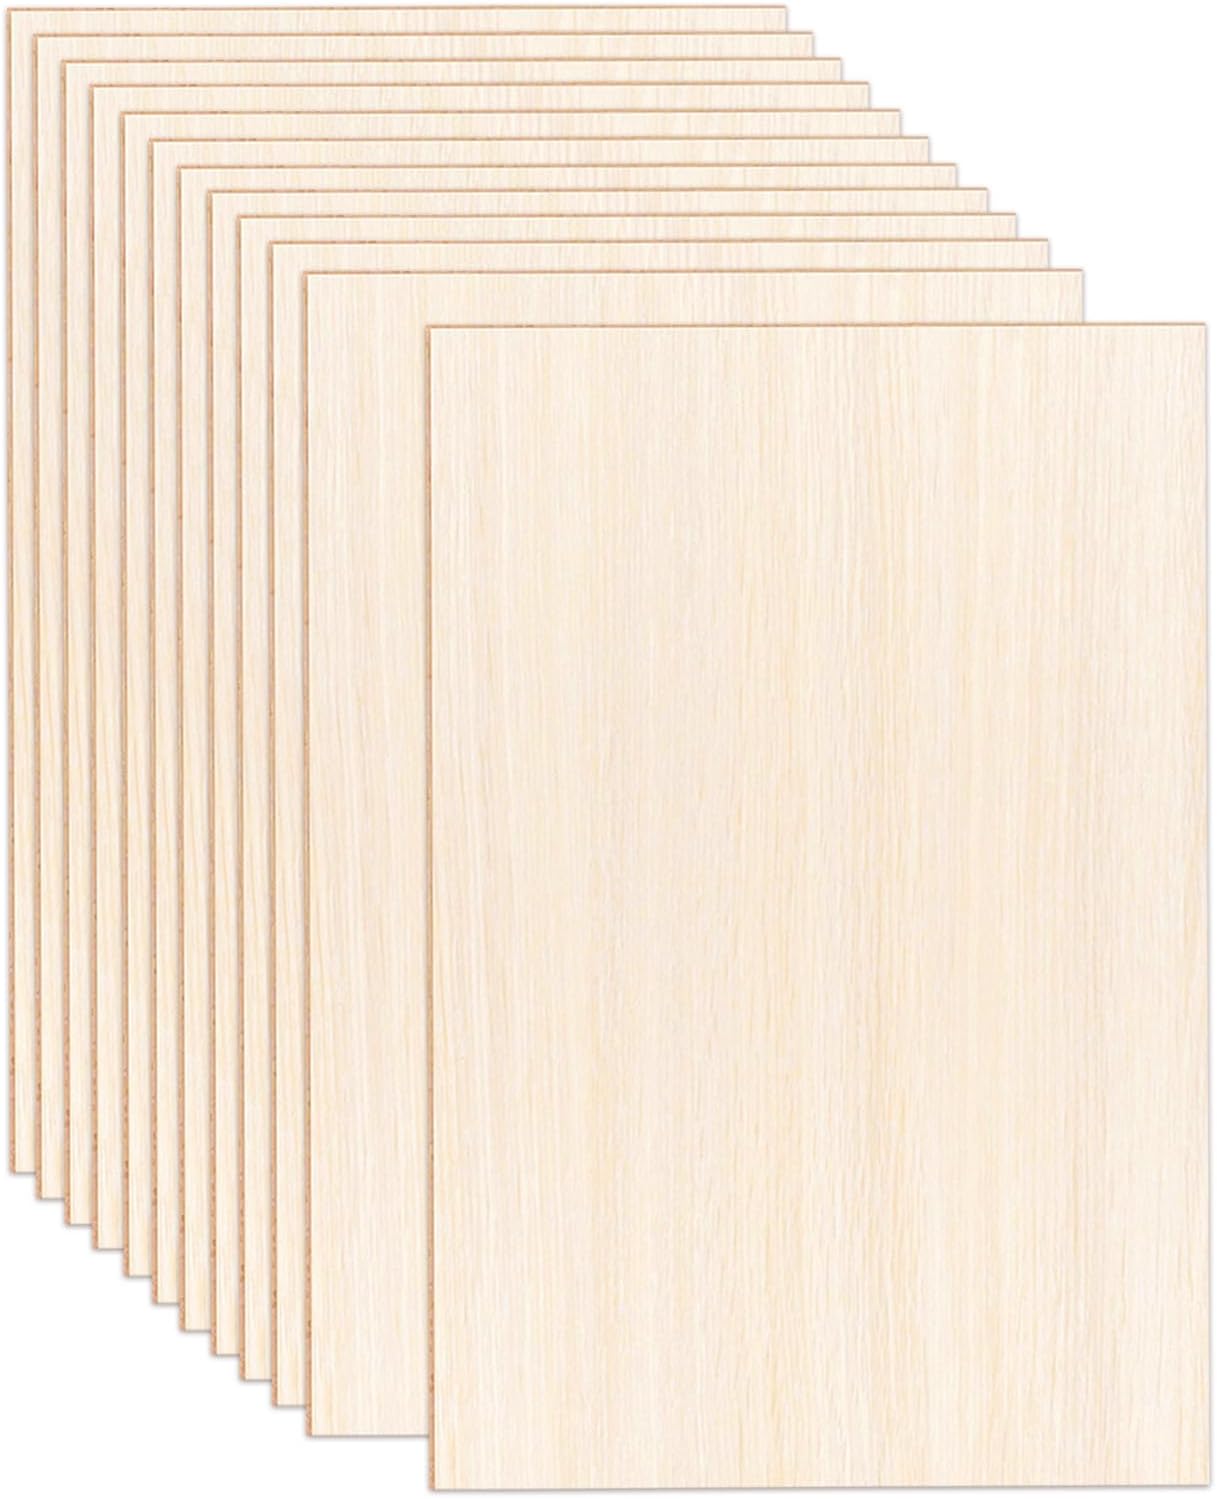 Painting Panels 12 x 16 x 3/4-inch, Pack of 4 Blank Wooden Signs for  Crafts, Wood Cradled Panels for Home Decor, by Woodpeckers 